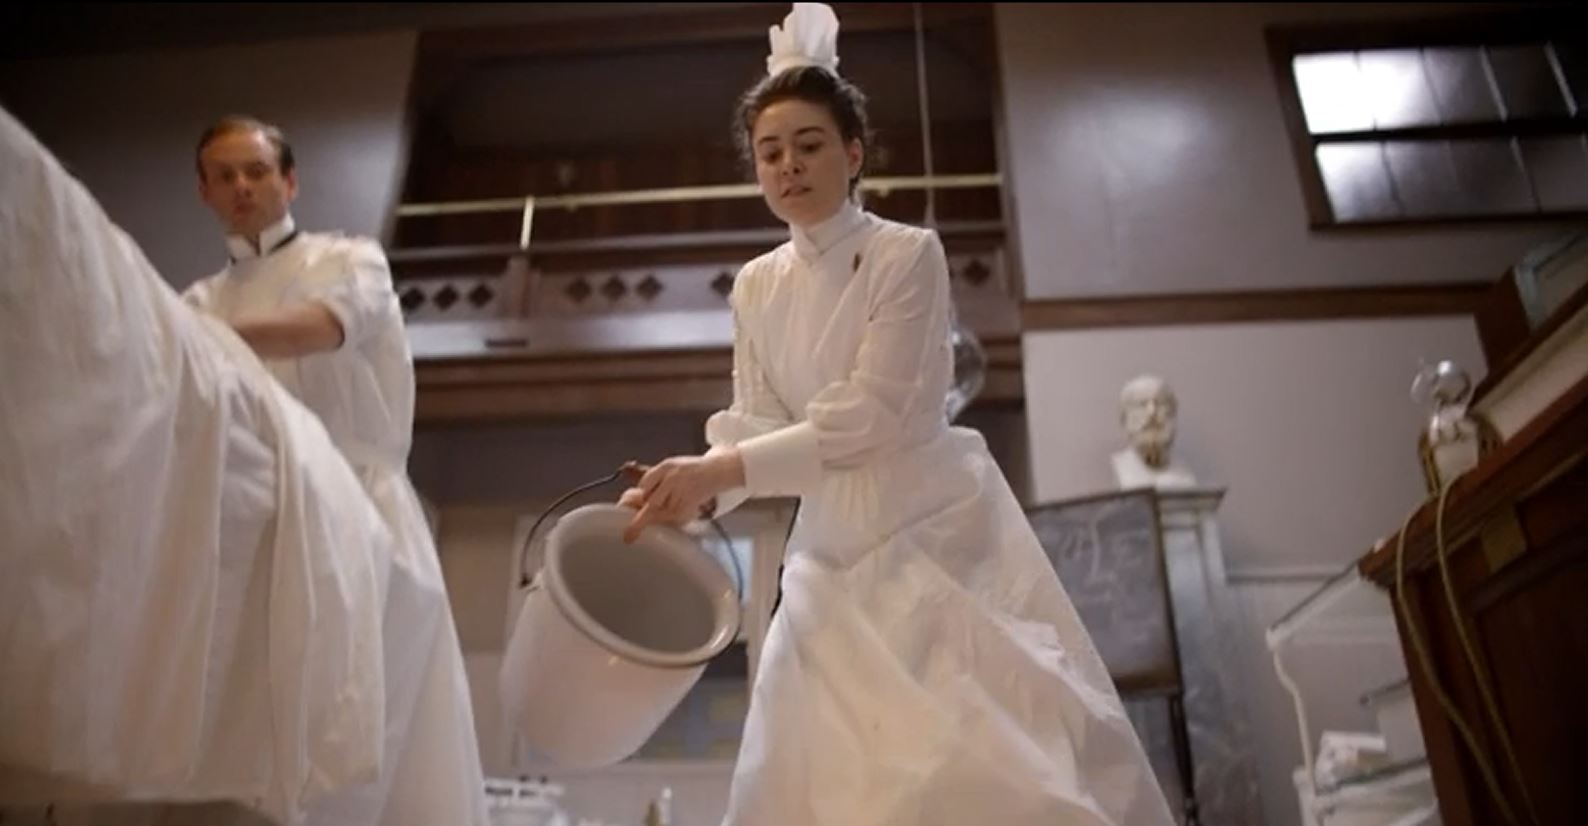 Caitlin Johnston in The Knick